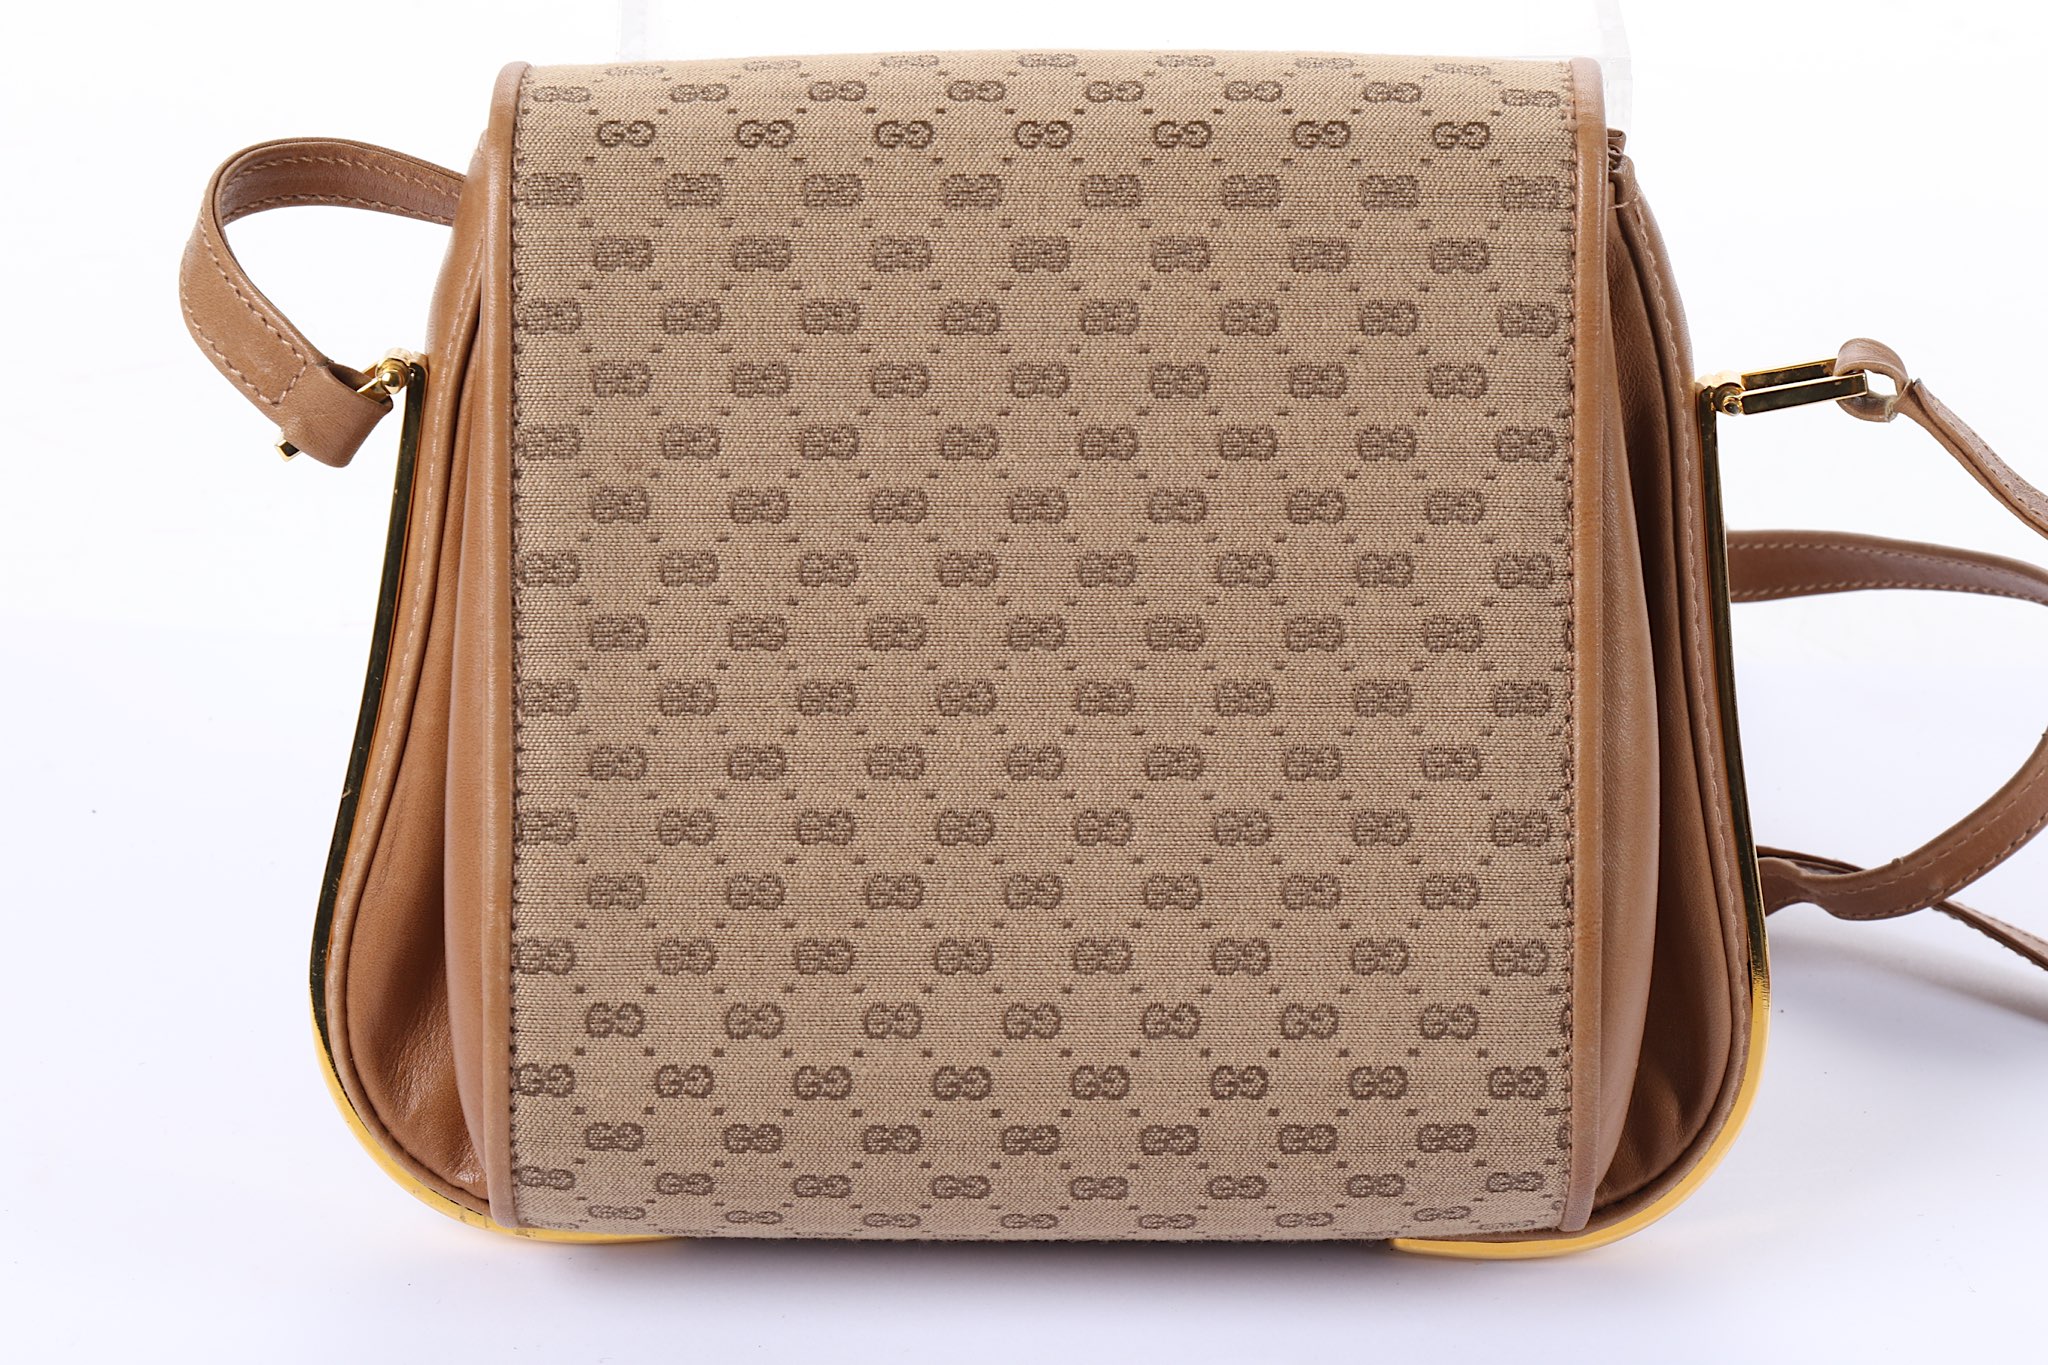 Vintage Gucci Monogram Cross Body Bag, probably 1970s, monogram canvas with brown leather trim and - Image 5 of 13